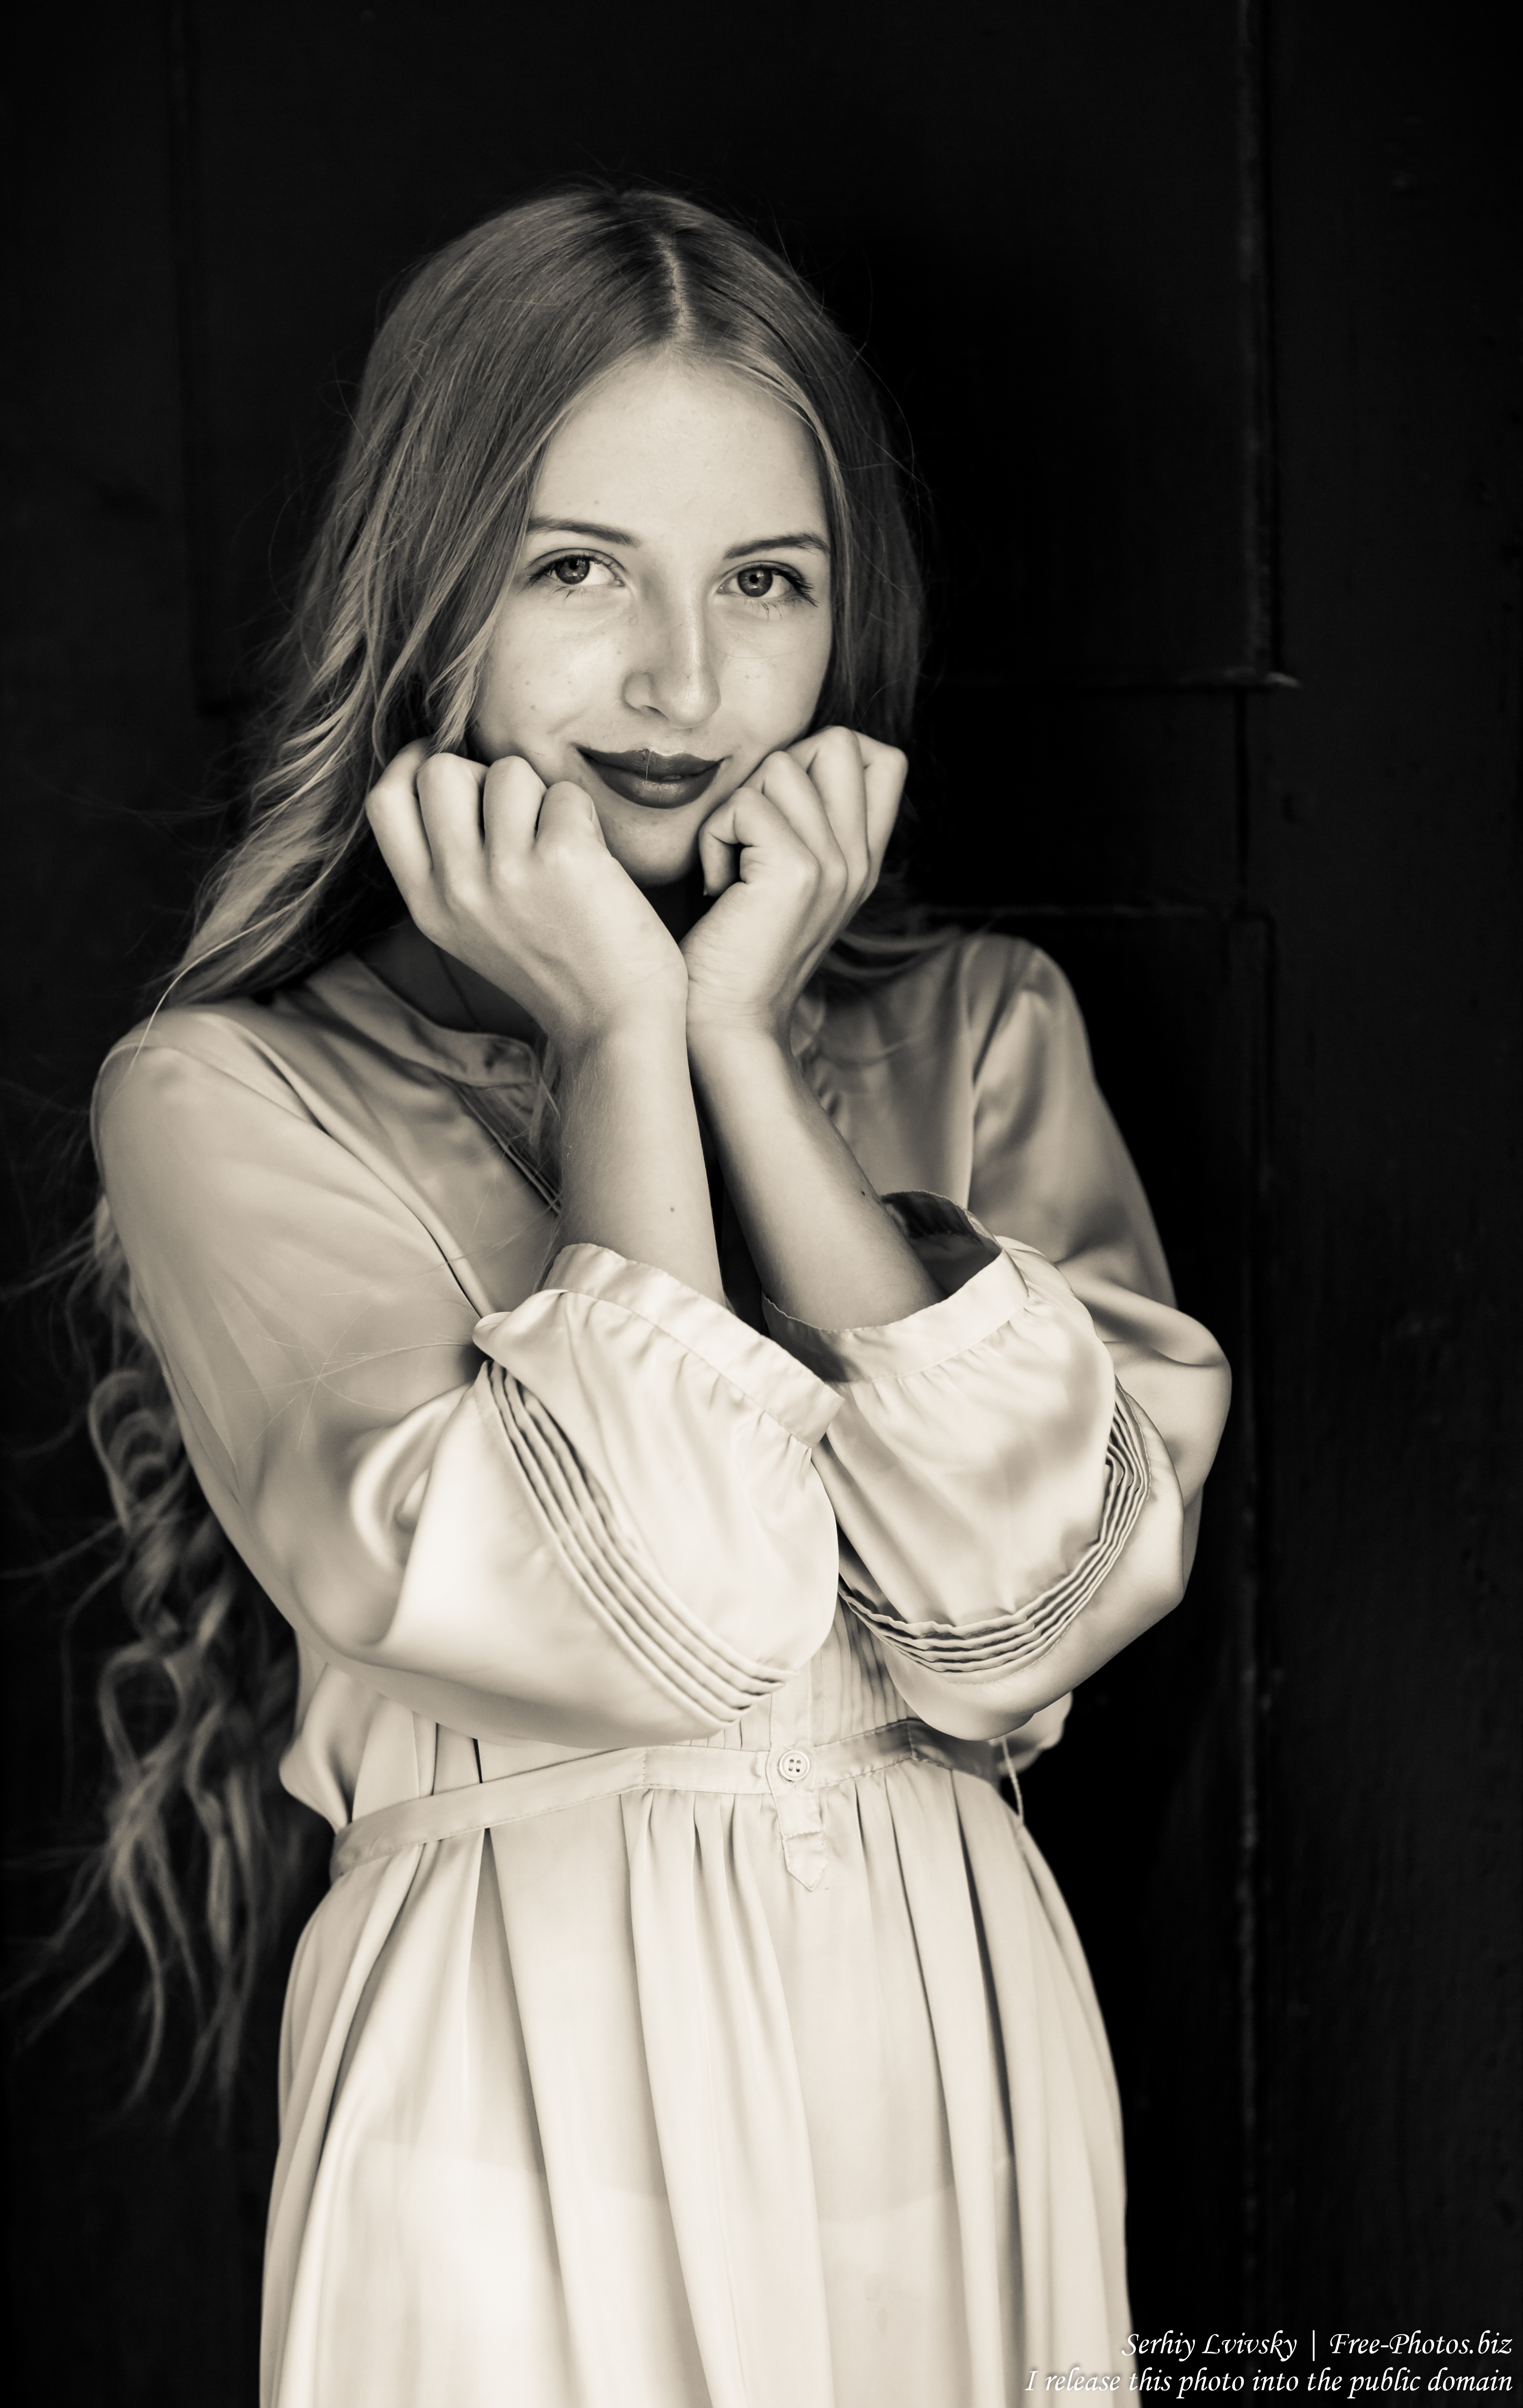 Ania - a 14-year-old natural blonde girl photographed by Serhiy Lvivsky in August 2017, picture 18